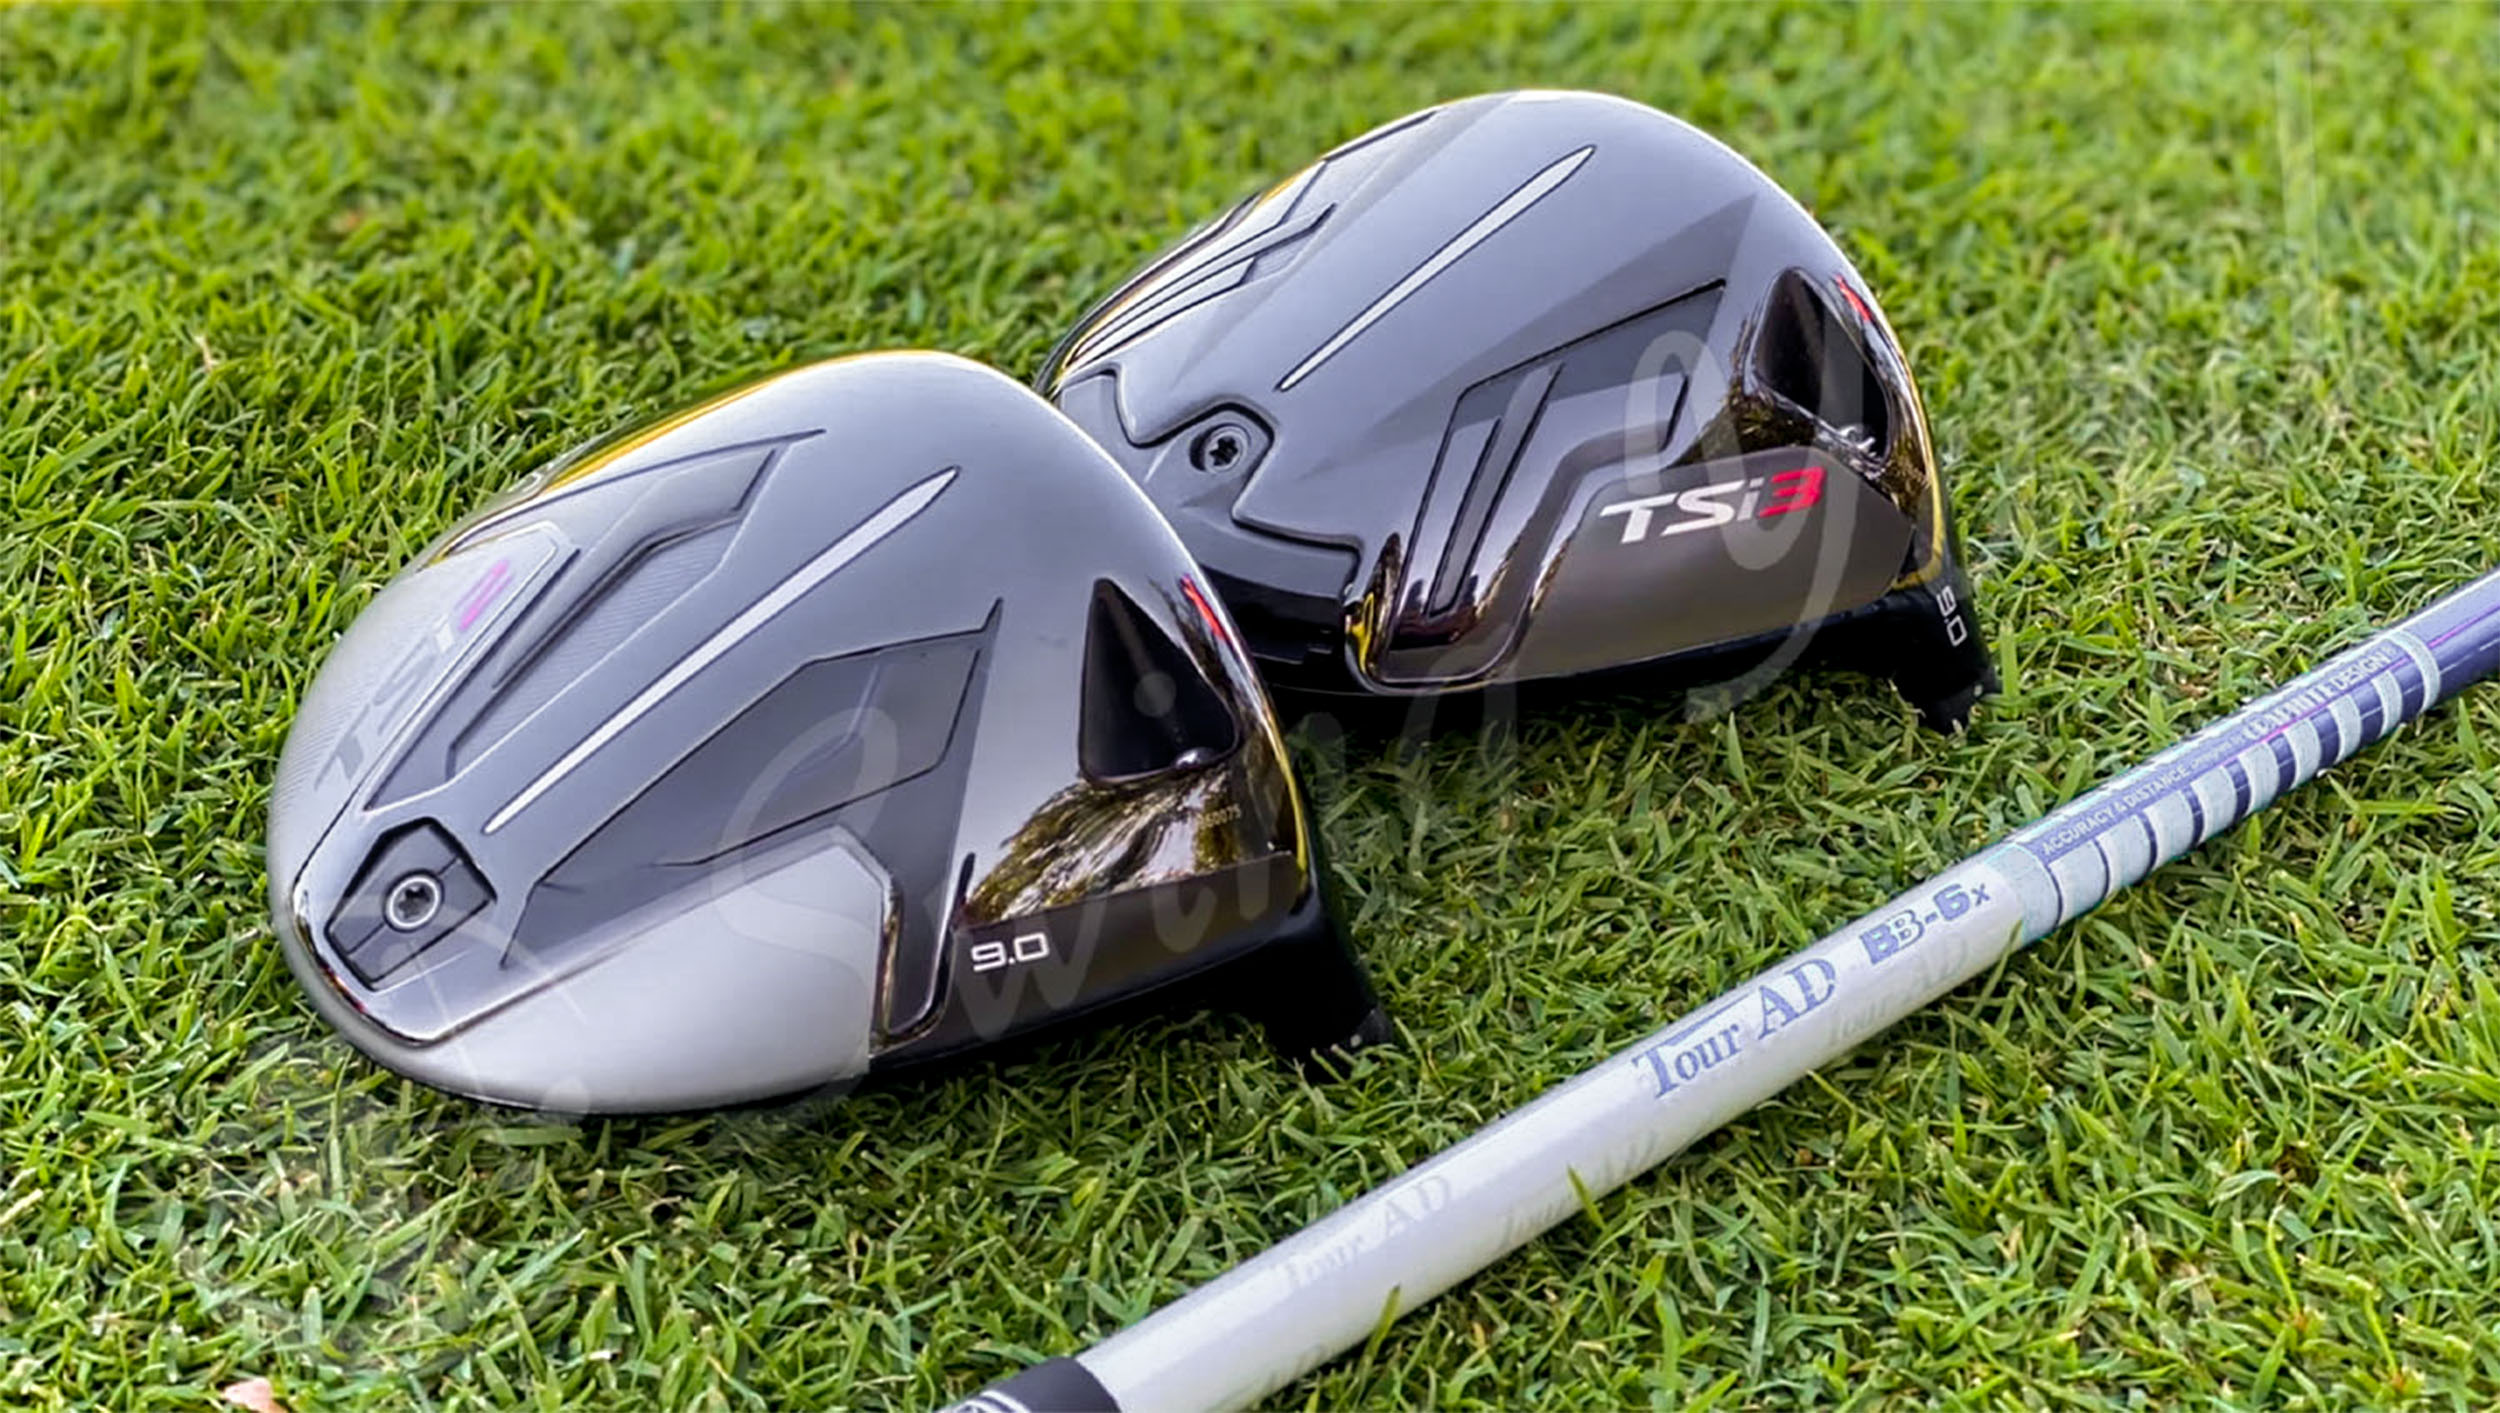 Titleist TSi2 and TSi3 driver heads in the grass